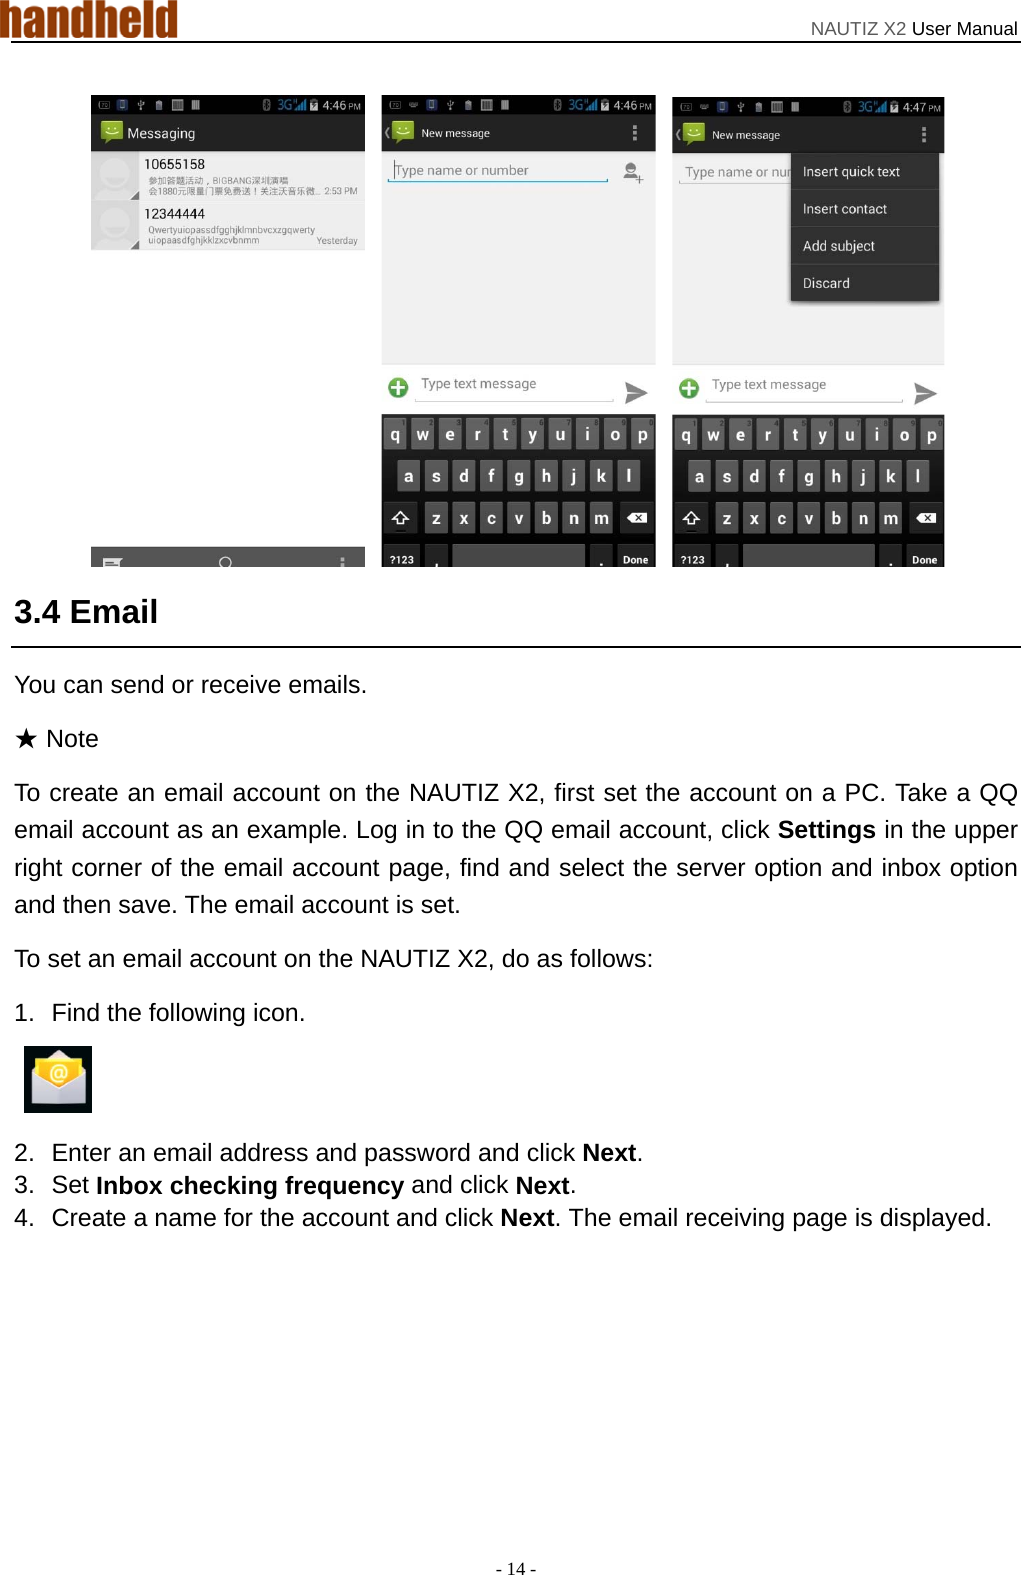 NAUTIZ X2 User Manual - 14 -    3.4 Email You can send or receive emails. ★ Note To create an email account on the NAUTIZ X2, first set the account on a PC. Take a QQ email account as an example. Log in to the QQ email account, click Settings in the upper right corner of the email account page, find and select the server option and inbox option and then save. The email account is set. To set an email account on the NAUTIZ X2, do as follows: 1.  Find the following icon.   2.  Enter an email address and password and click Next.  3. Set Inbox checking frequency and click Next. 4.  Create a name for the account and click Next. The email receiving page is displayed. 